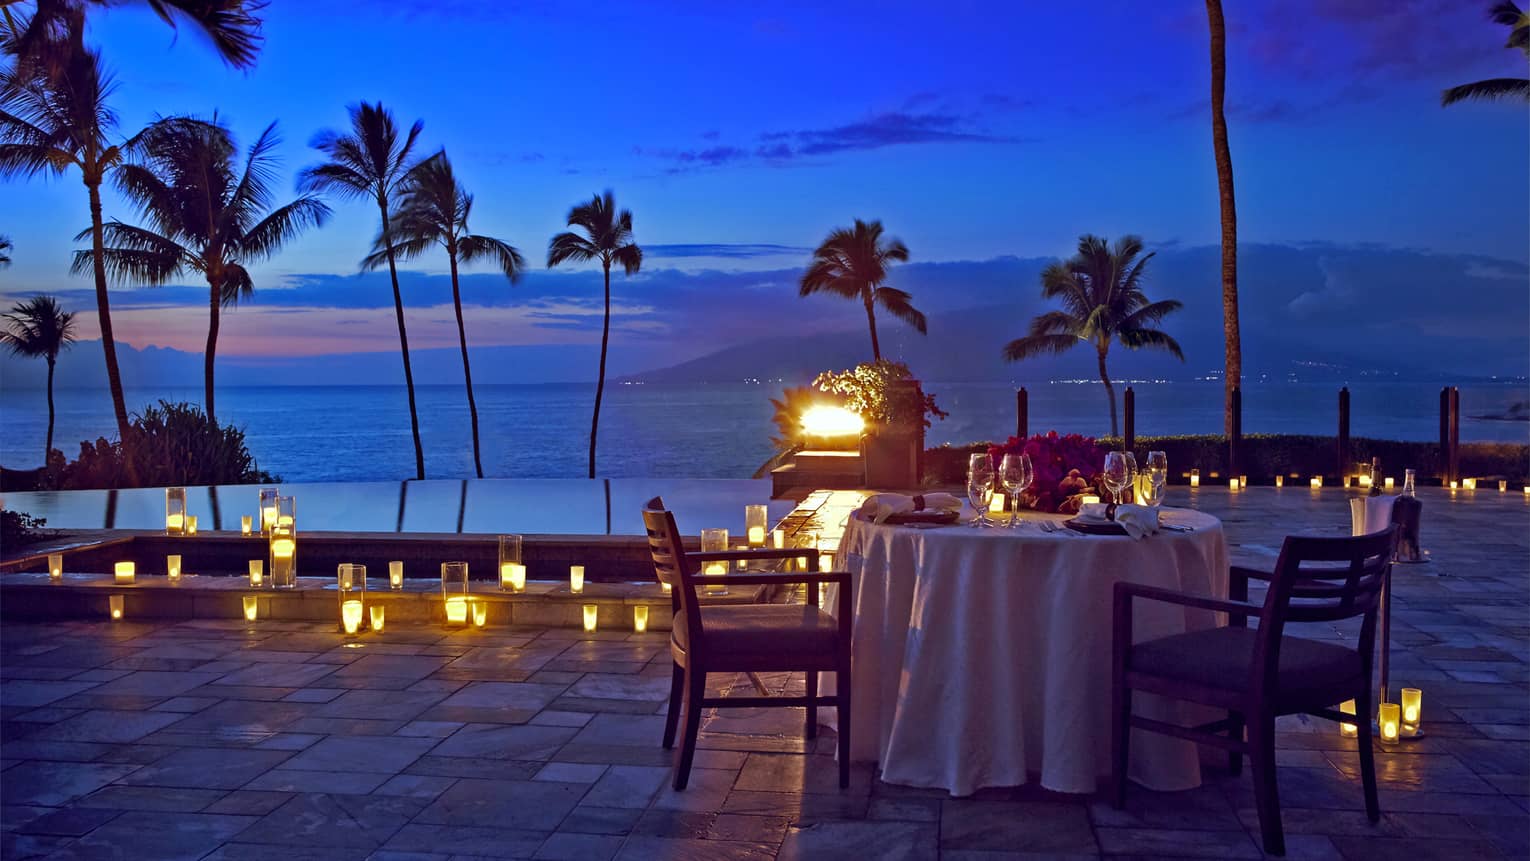 An outdoor candlelit dinner by the seaside in Maui